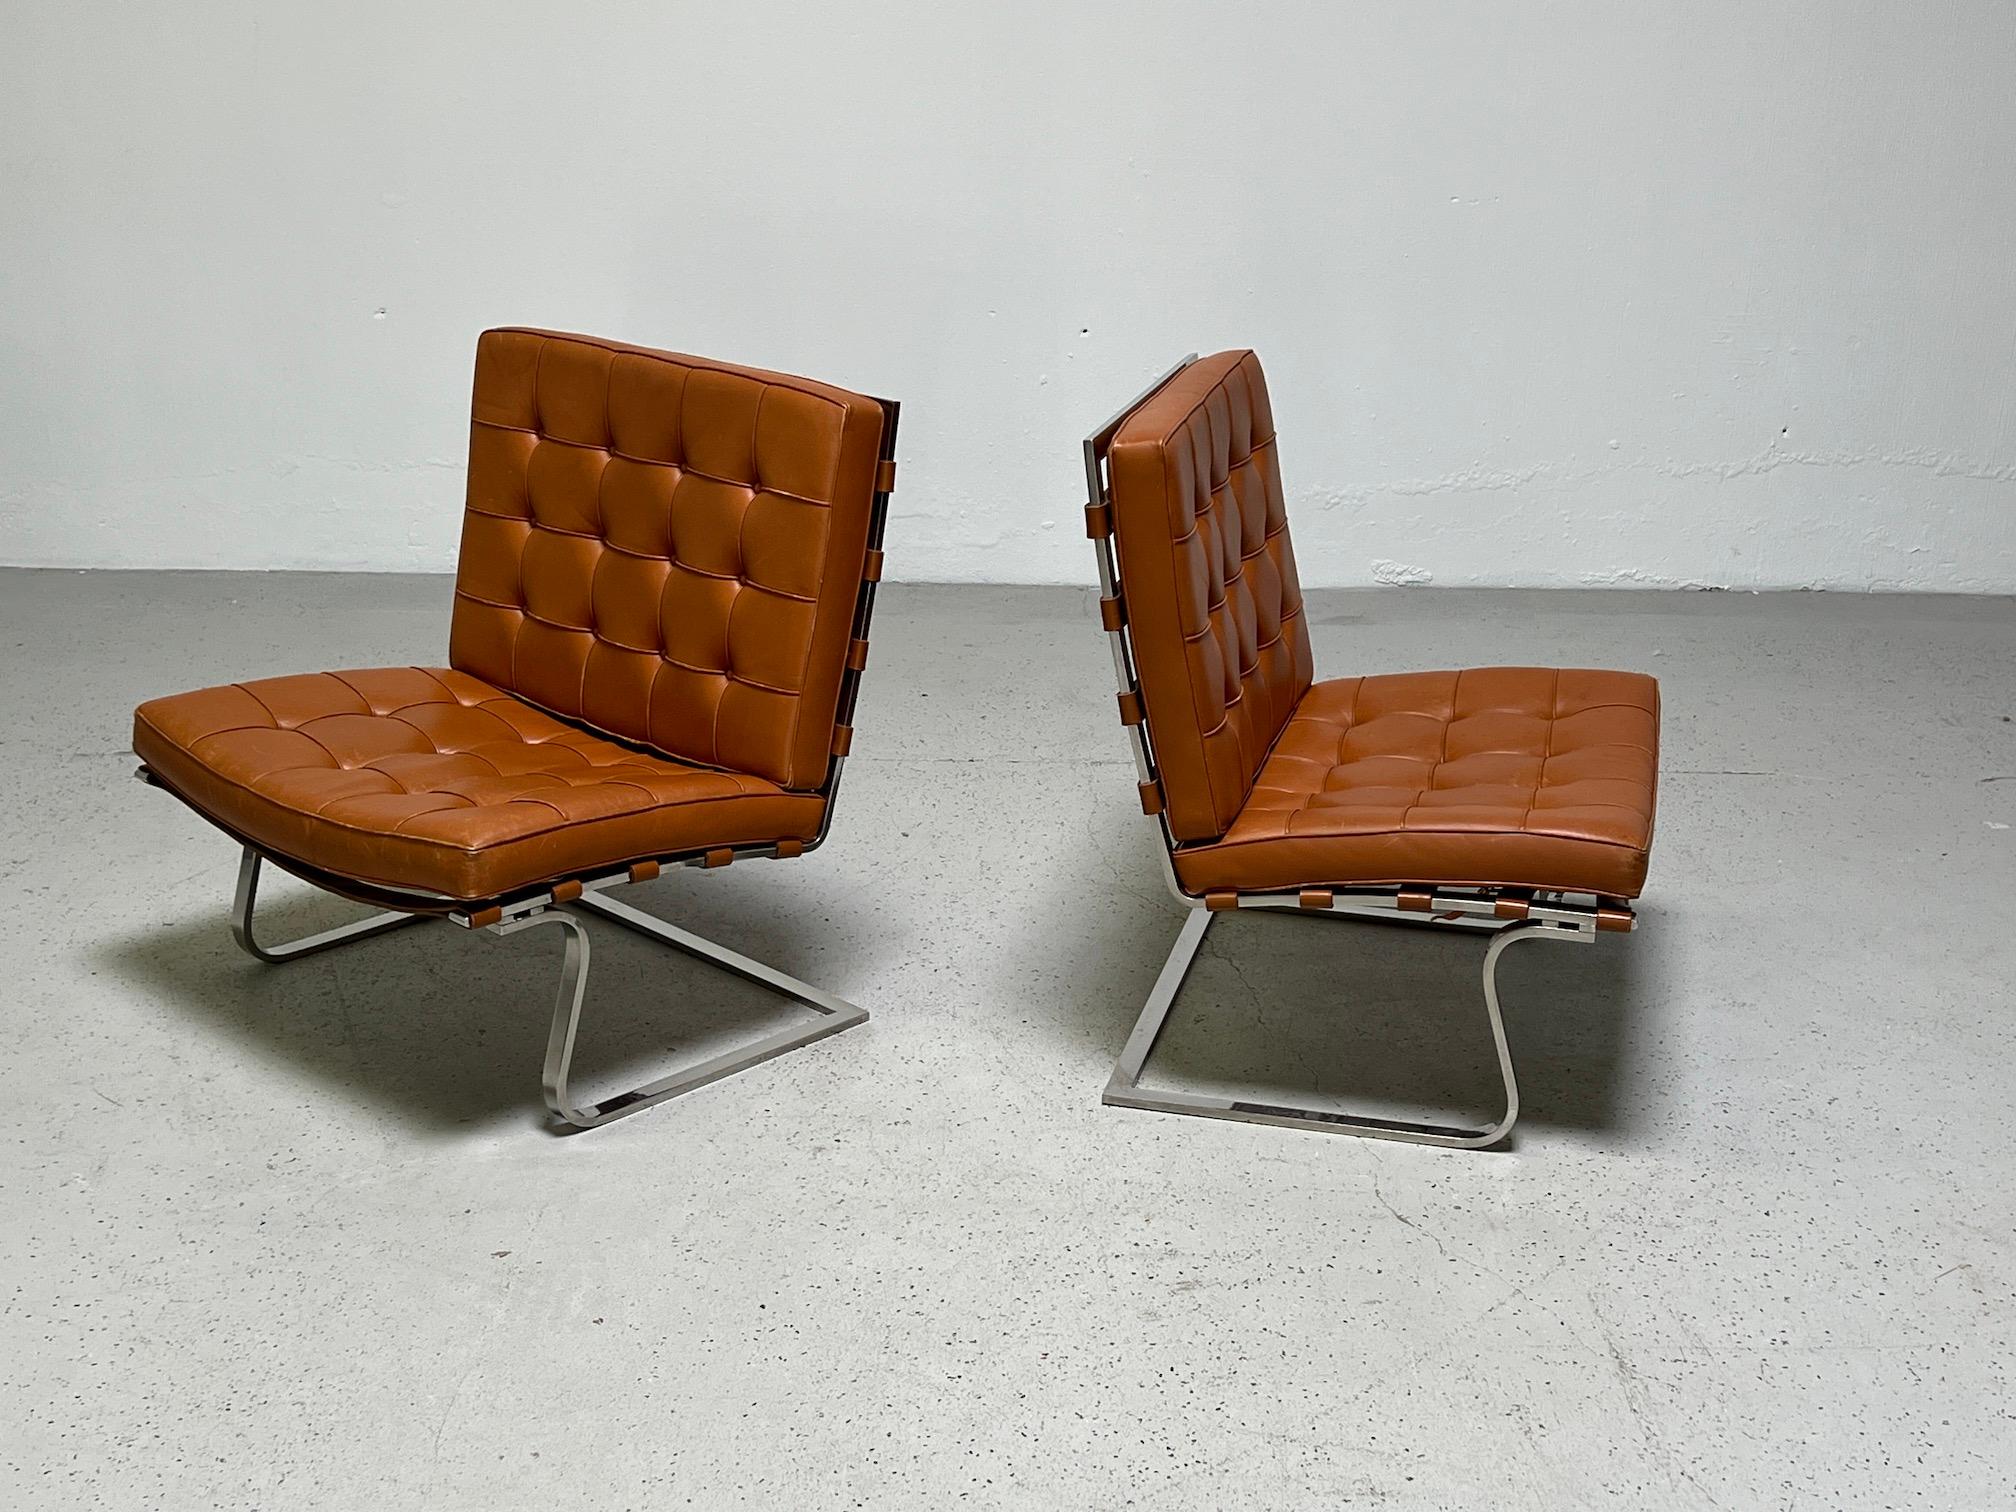 Late 20th Century Pair of Tugendhat Chairs by Mies van der Rohe for Knoll